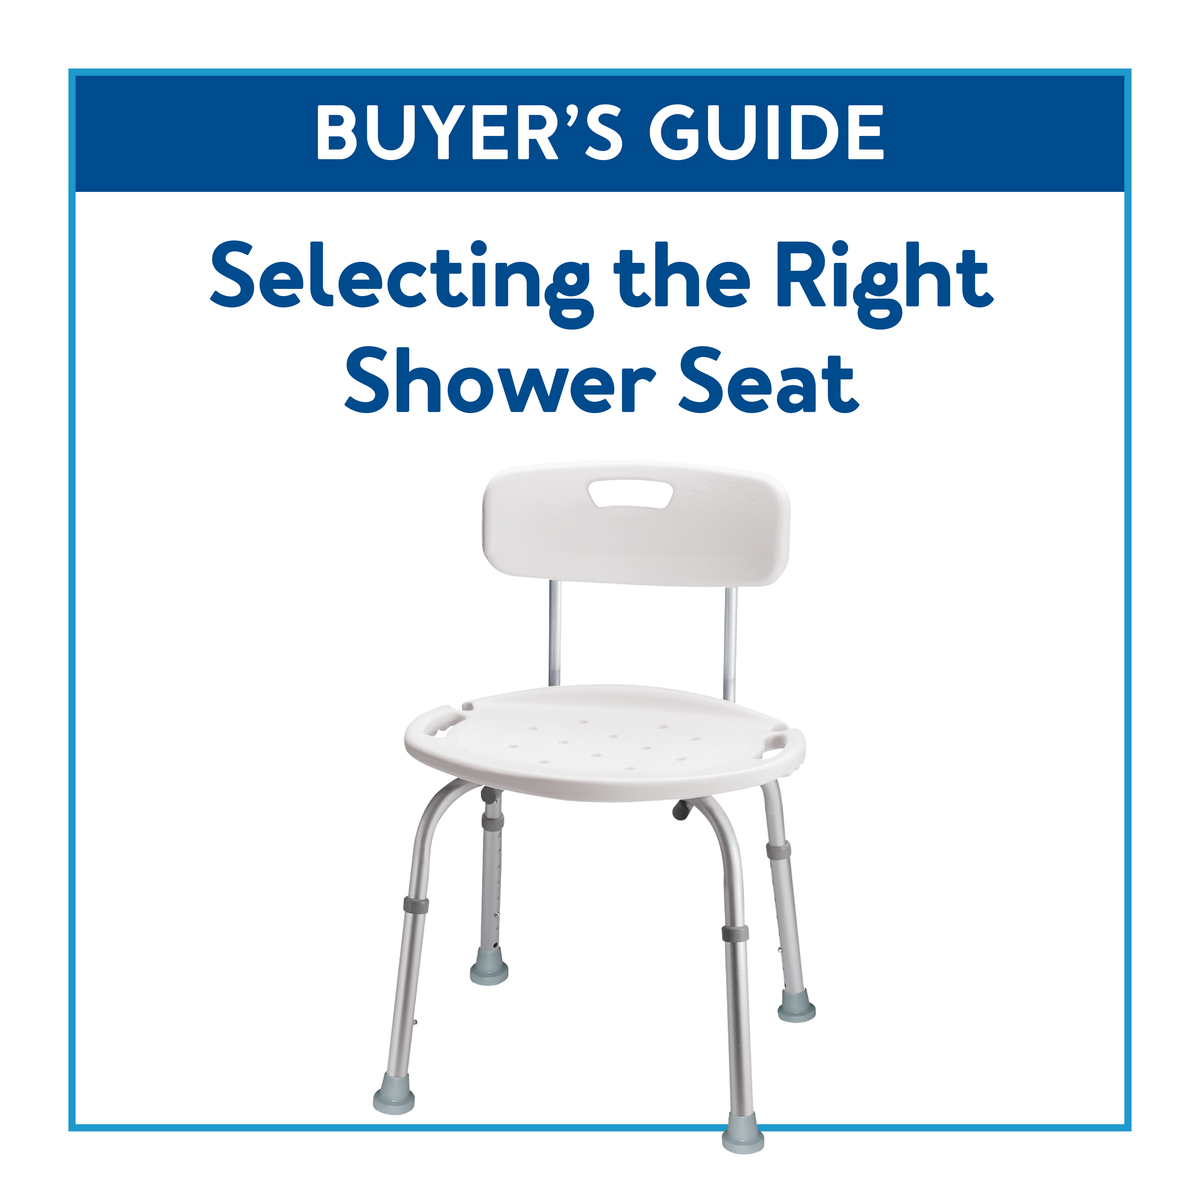 The Carex Shower Seat with the text Buyer’s Guide: Selecting the Right Shower Seat